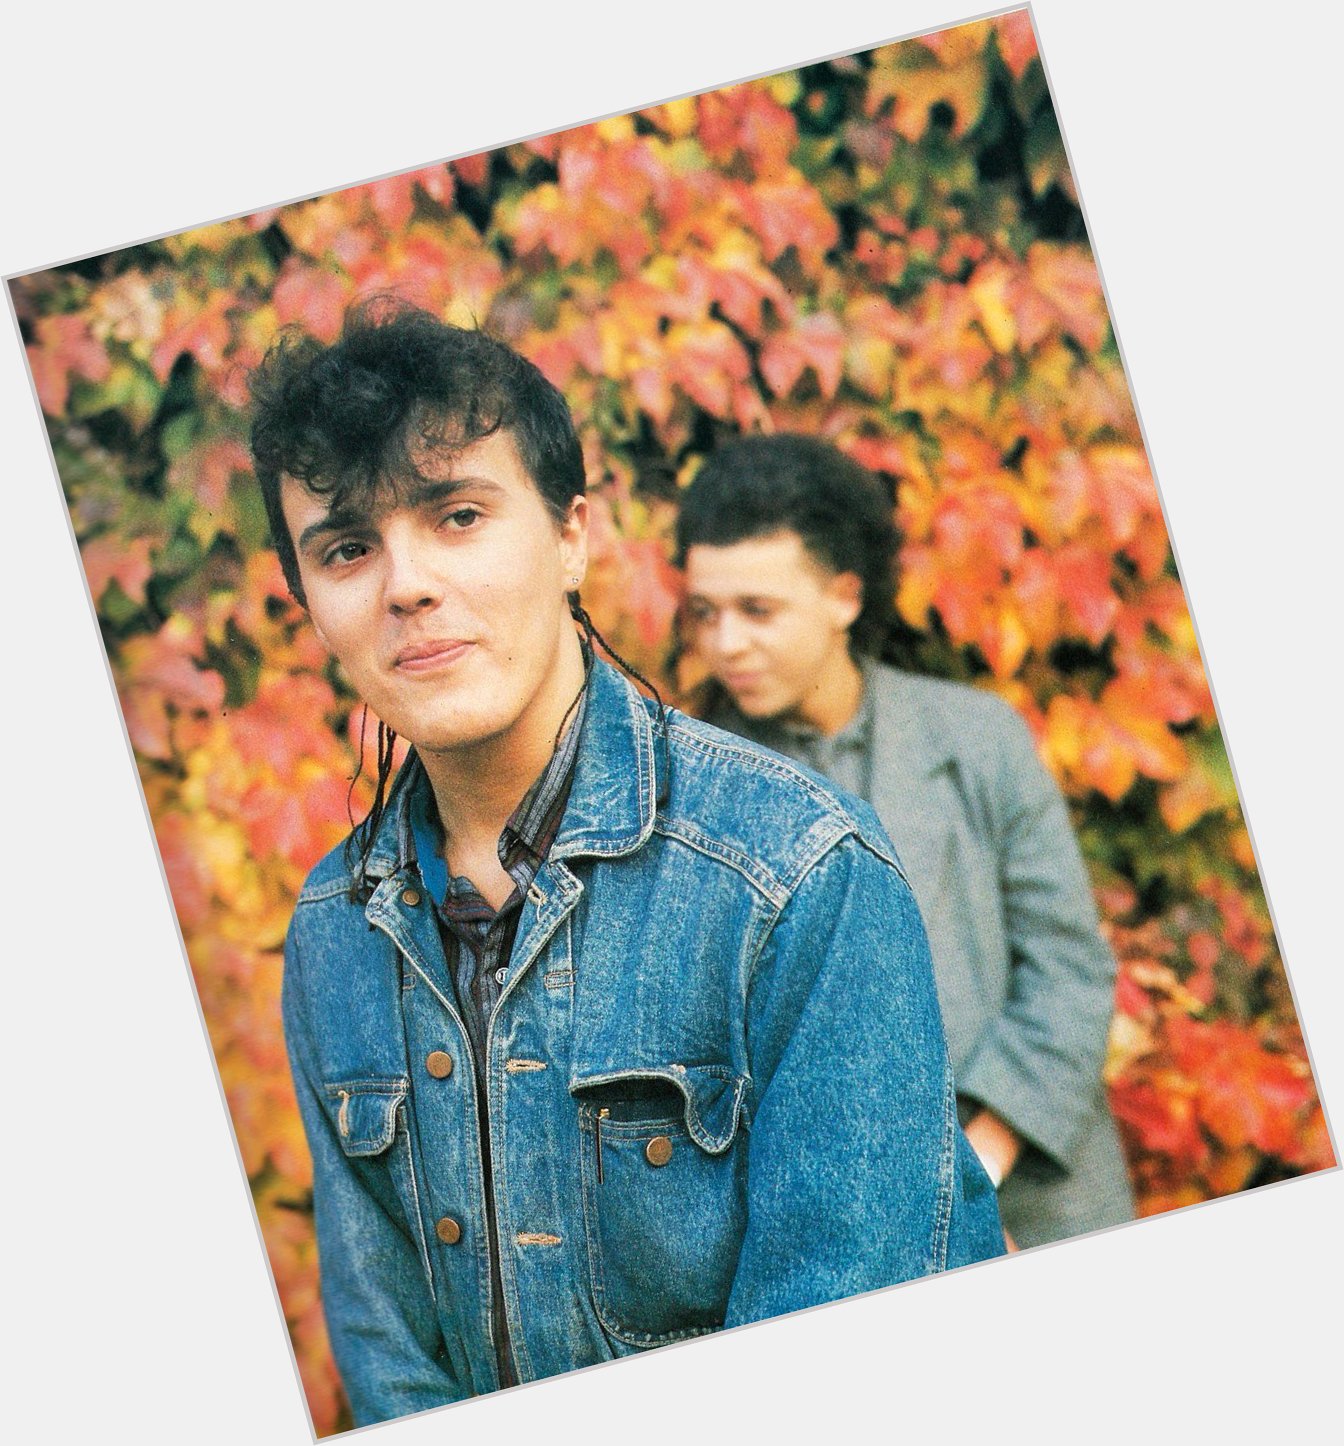 Happy 60th birthday to Curt Smith of Tears For Fears. 